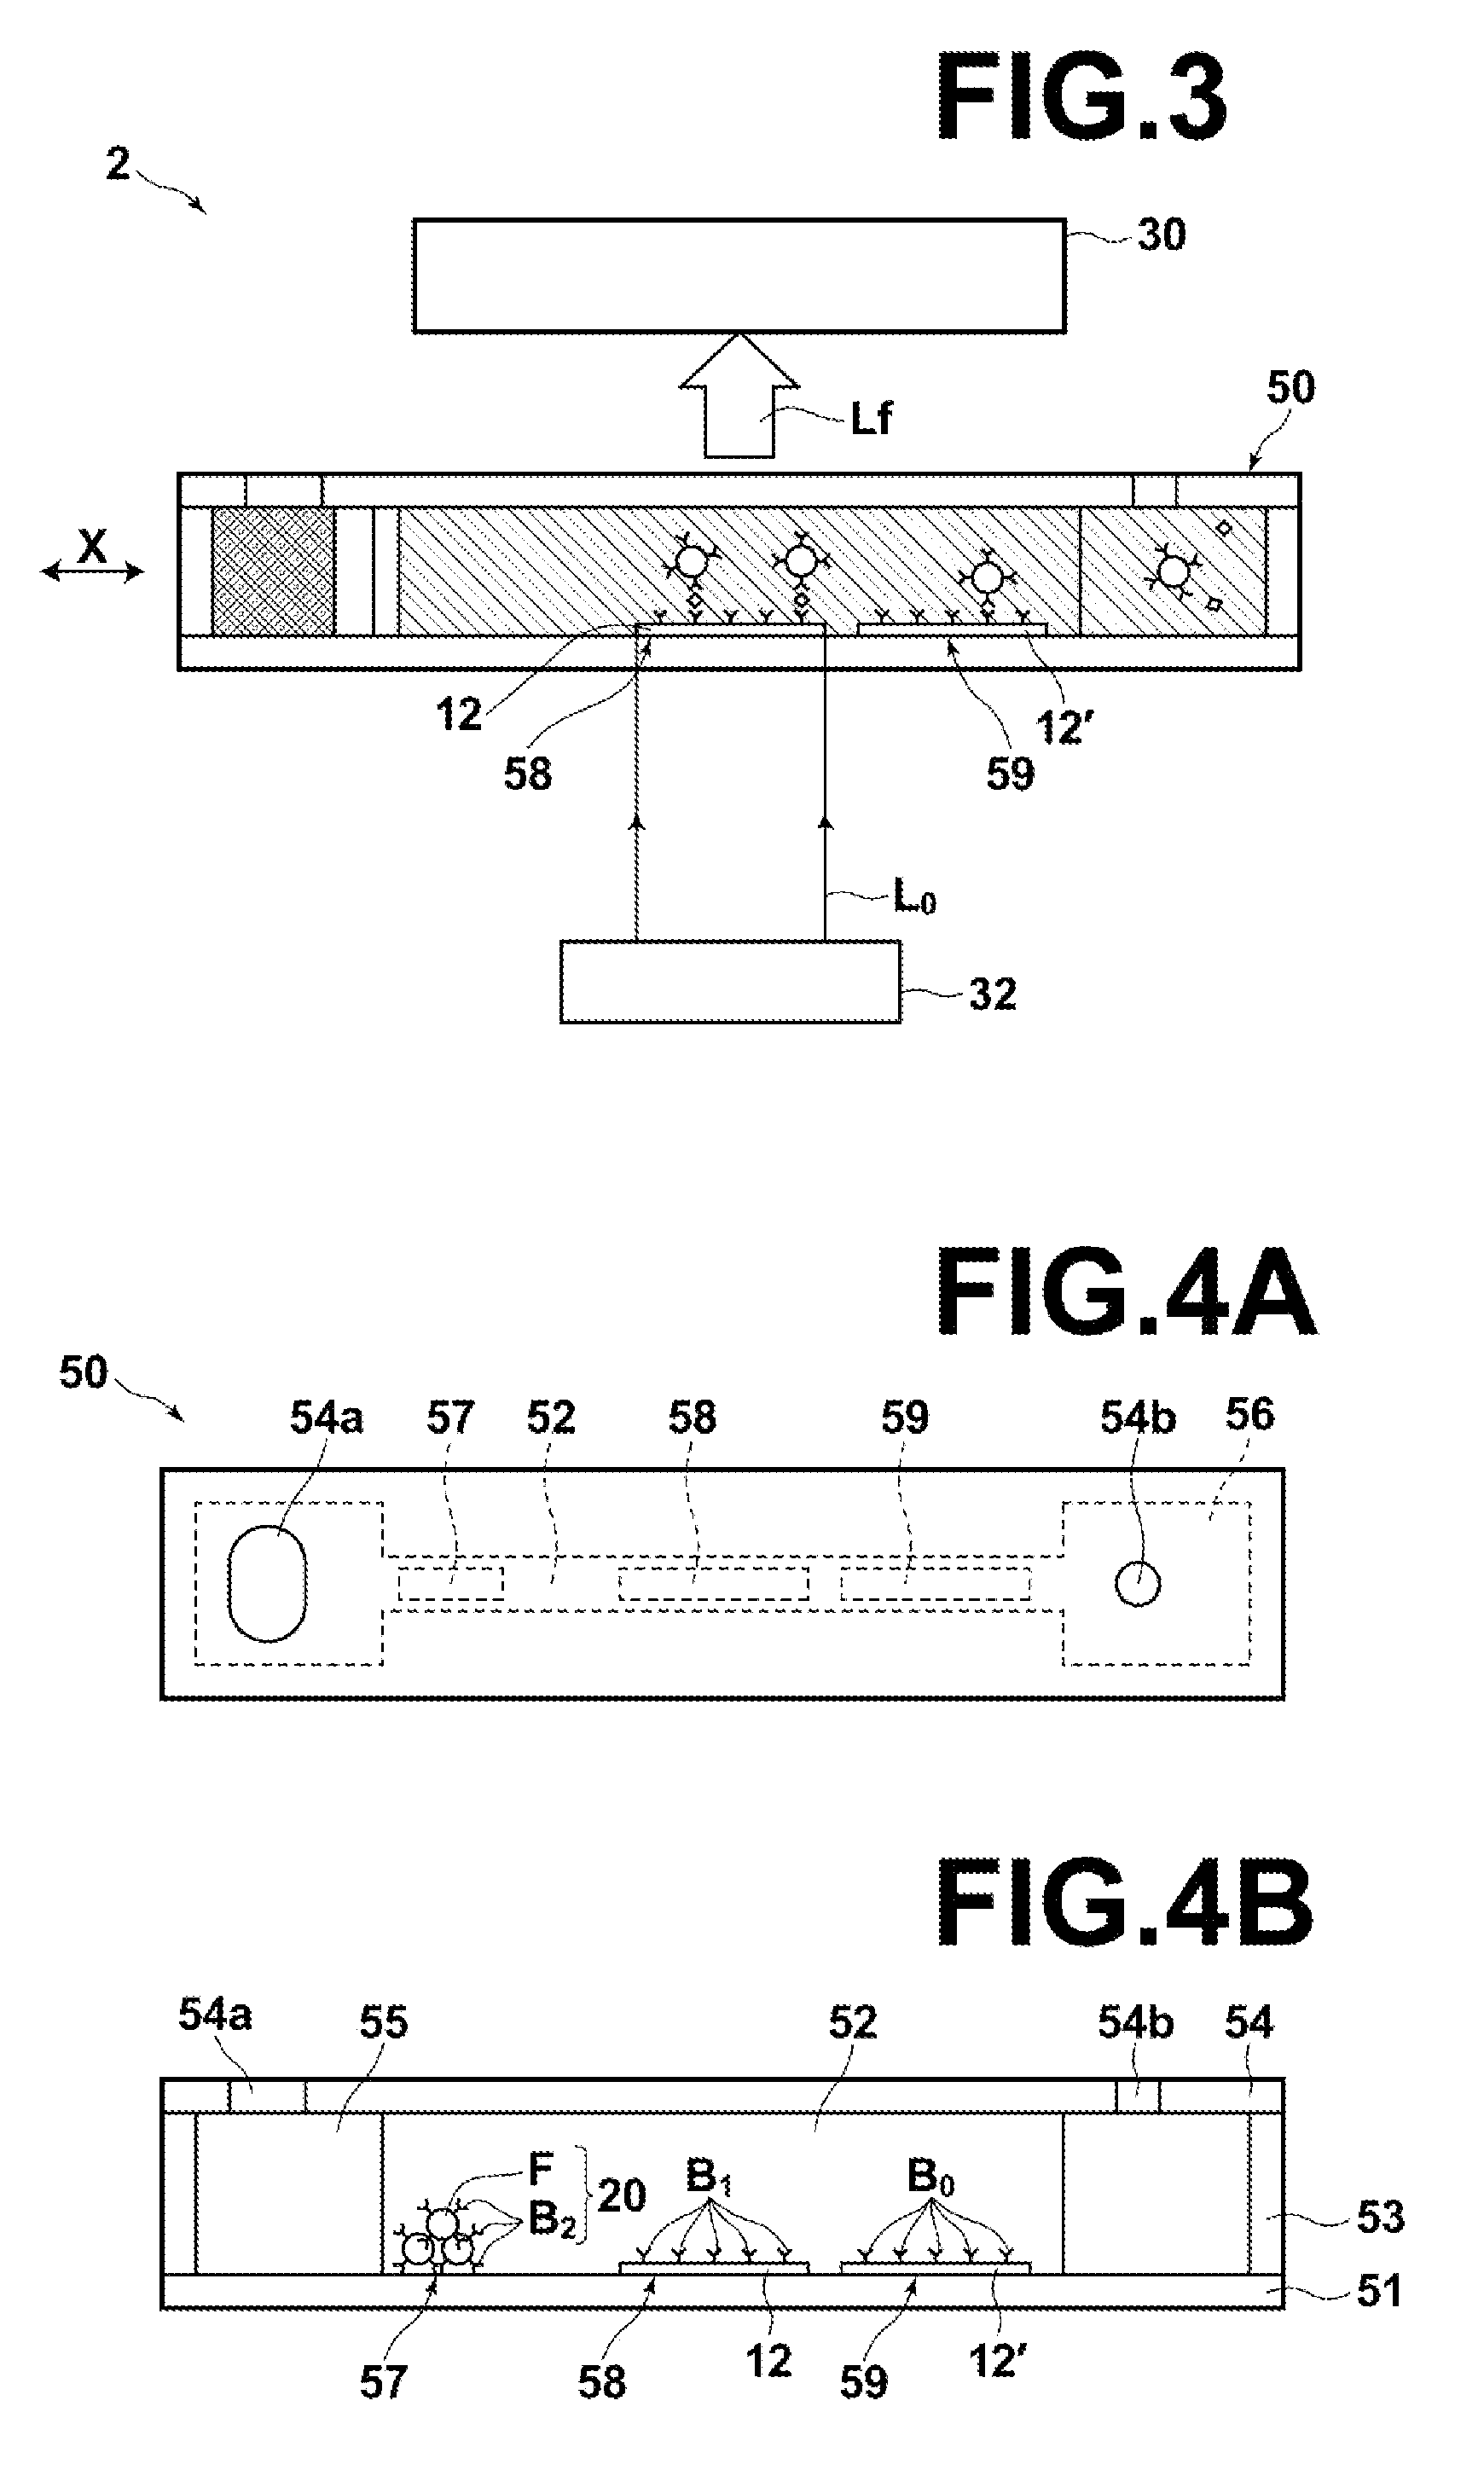 Fluorescence detecting apparatus, sample cell for detecting fluorescence, and fluorescence detecting method